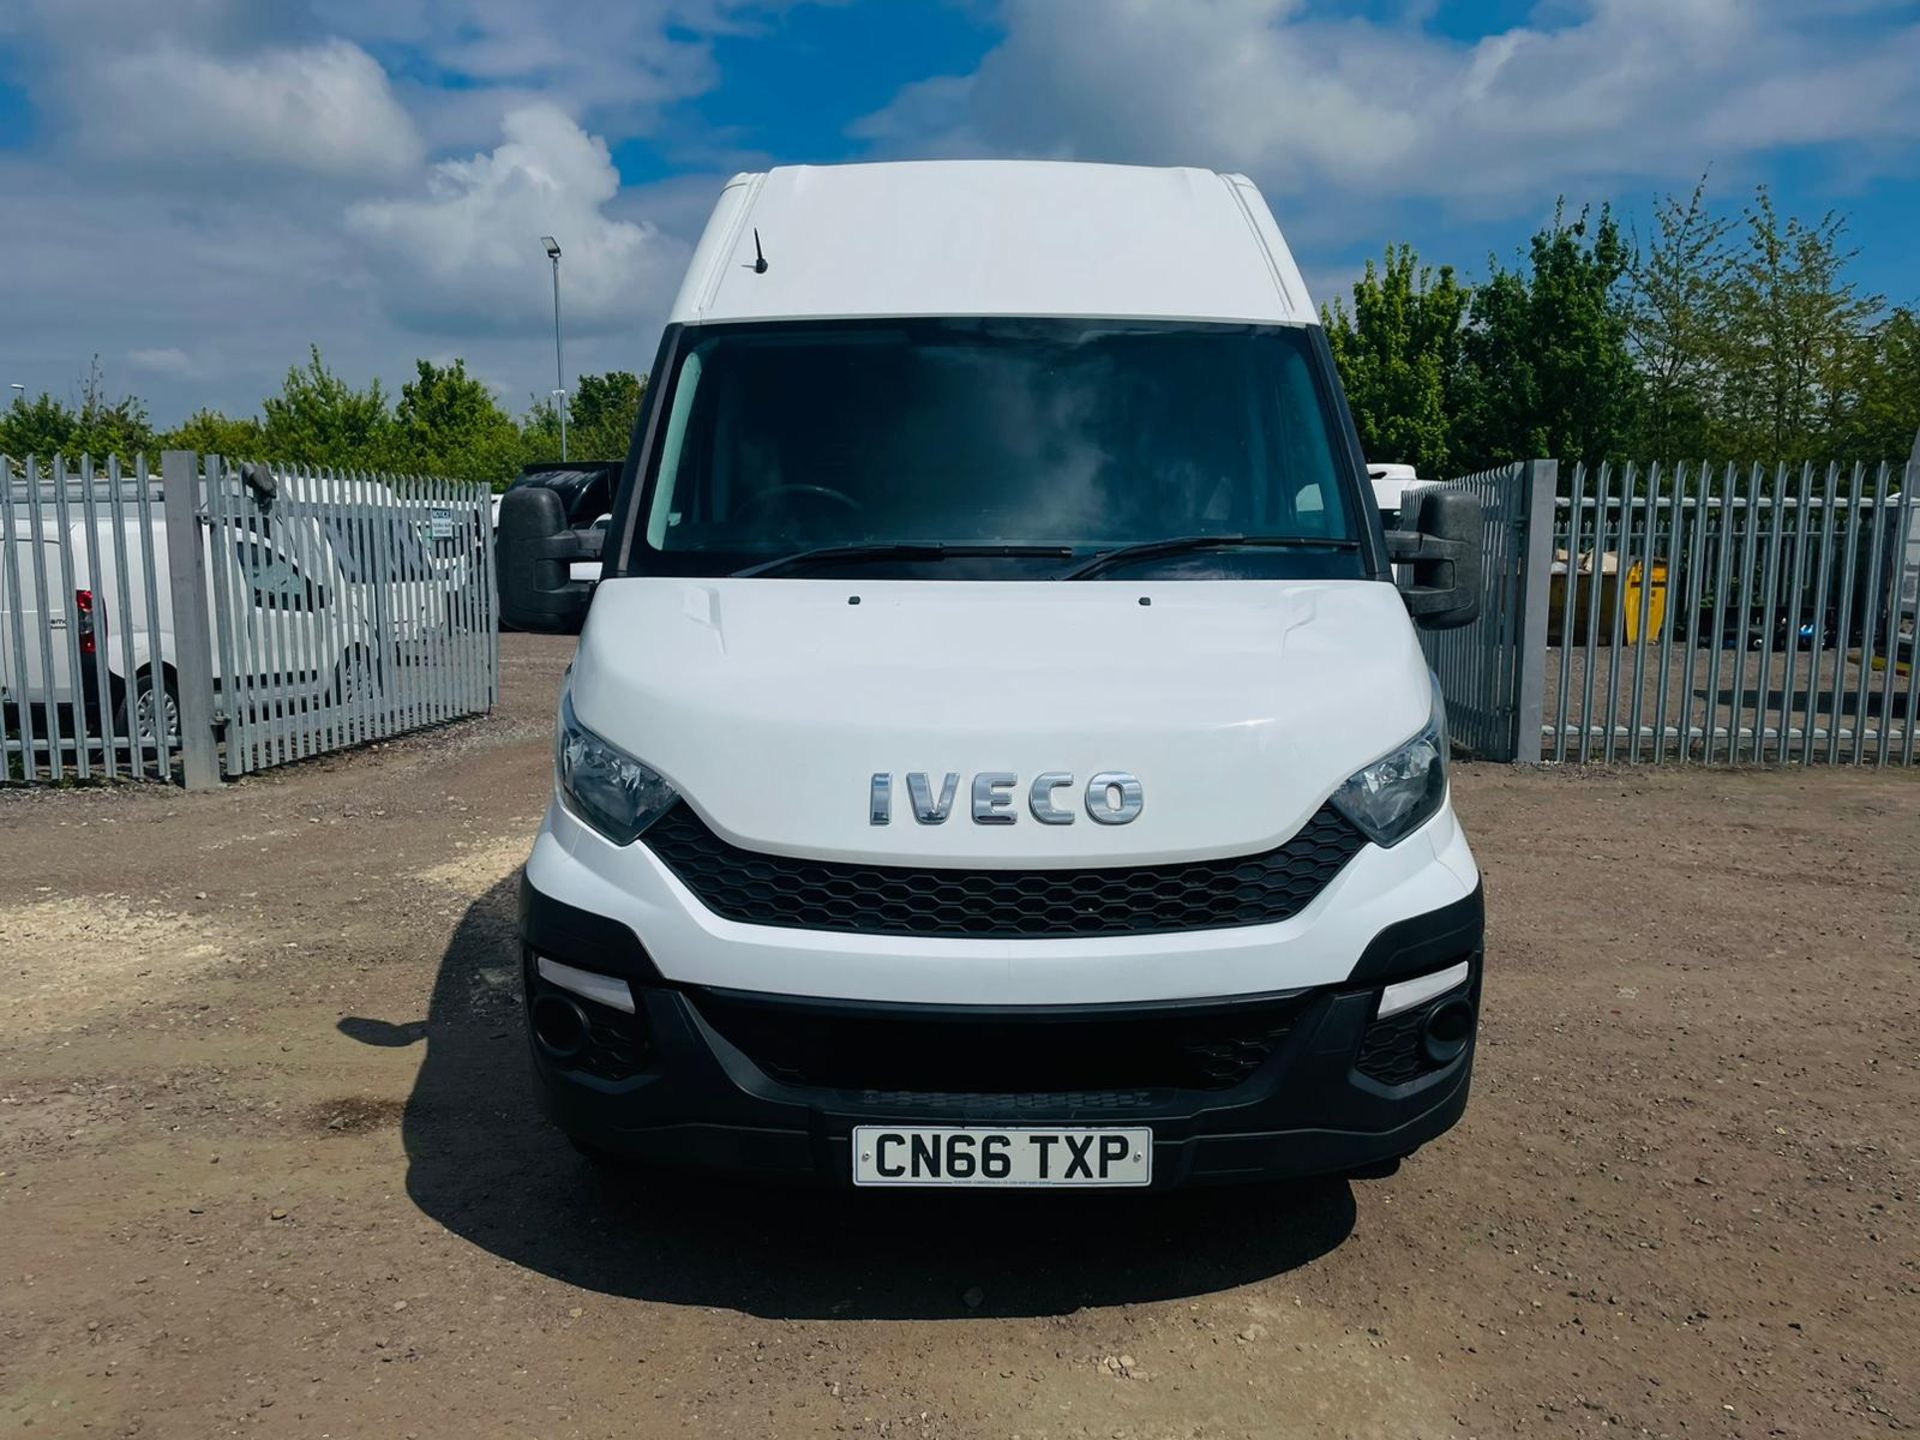 ** ON SALE **Iveco Daily 35S13 2.3 L2 H1 2016 '66 Reg' -ULEZ Compliant -Bluetooth Handsfree -Tow Bar - Image 2 of 24